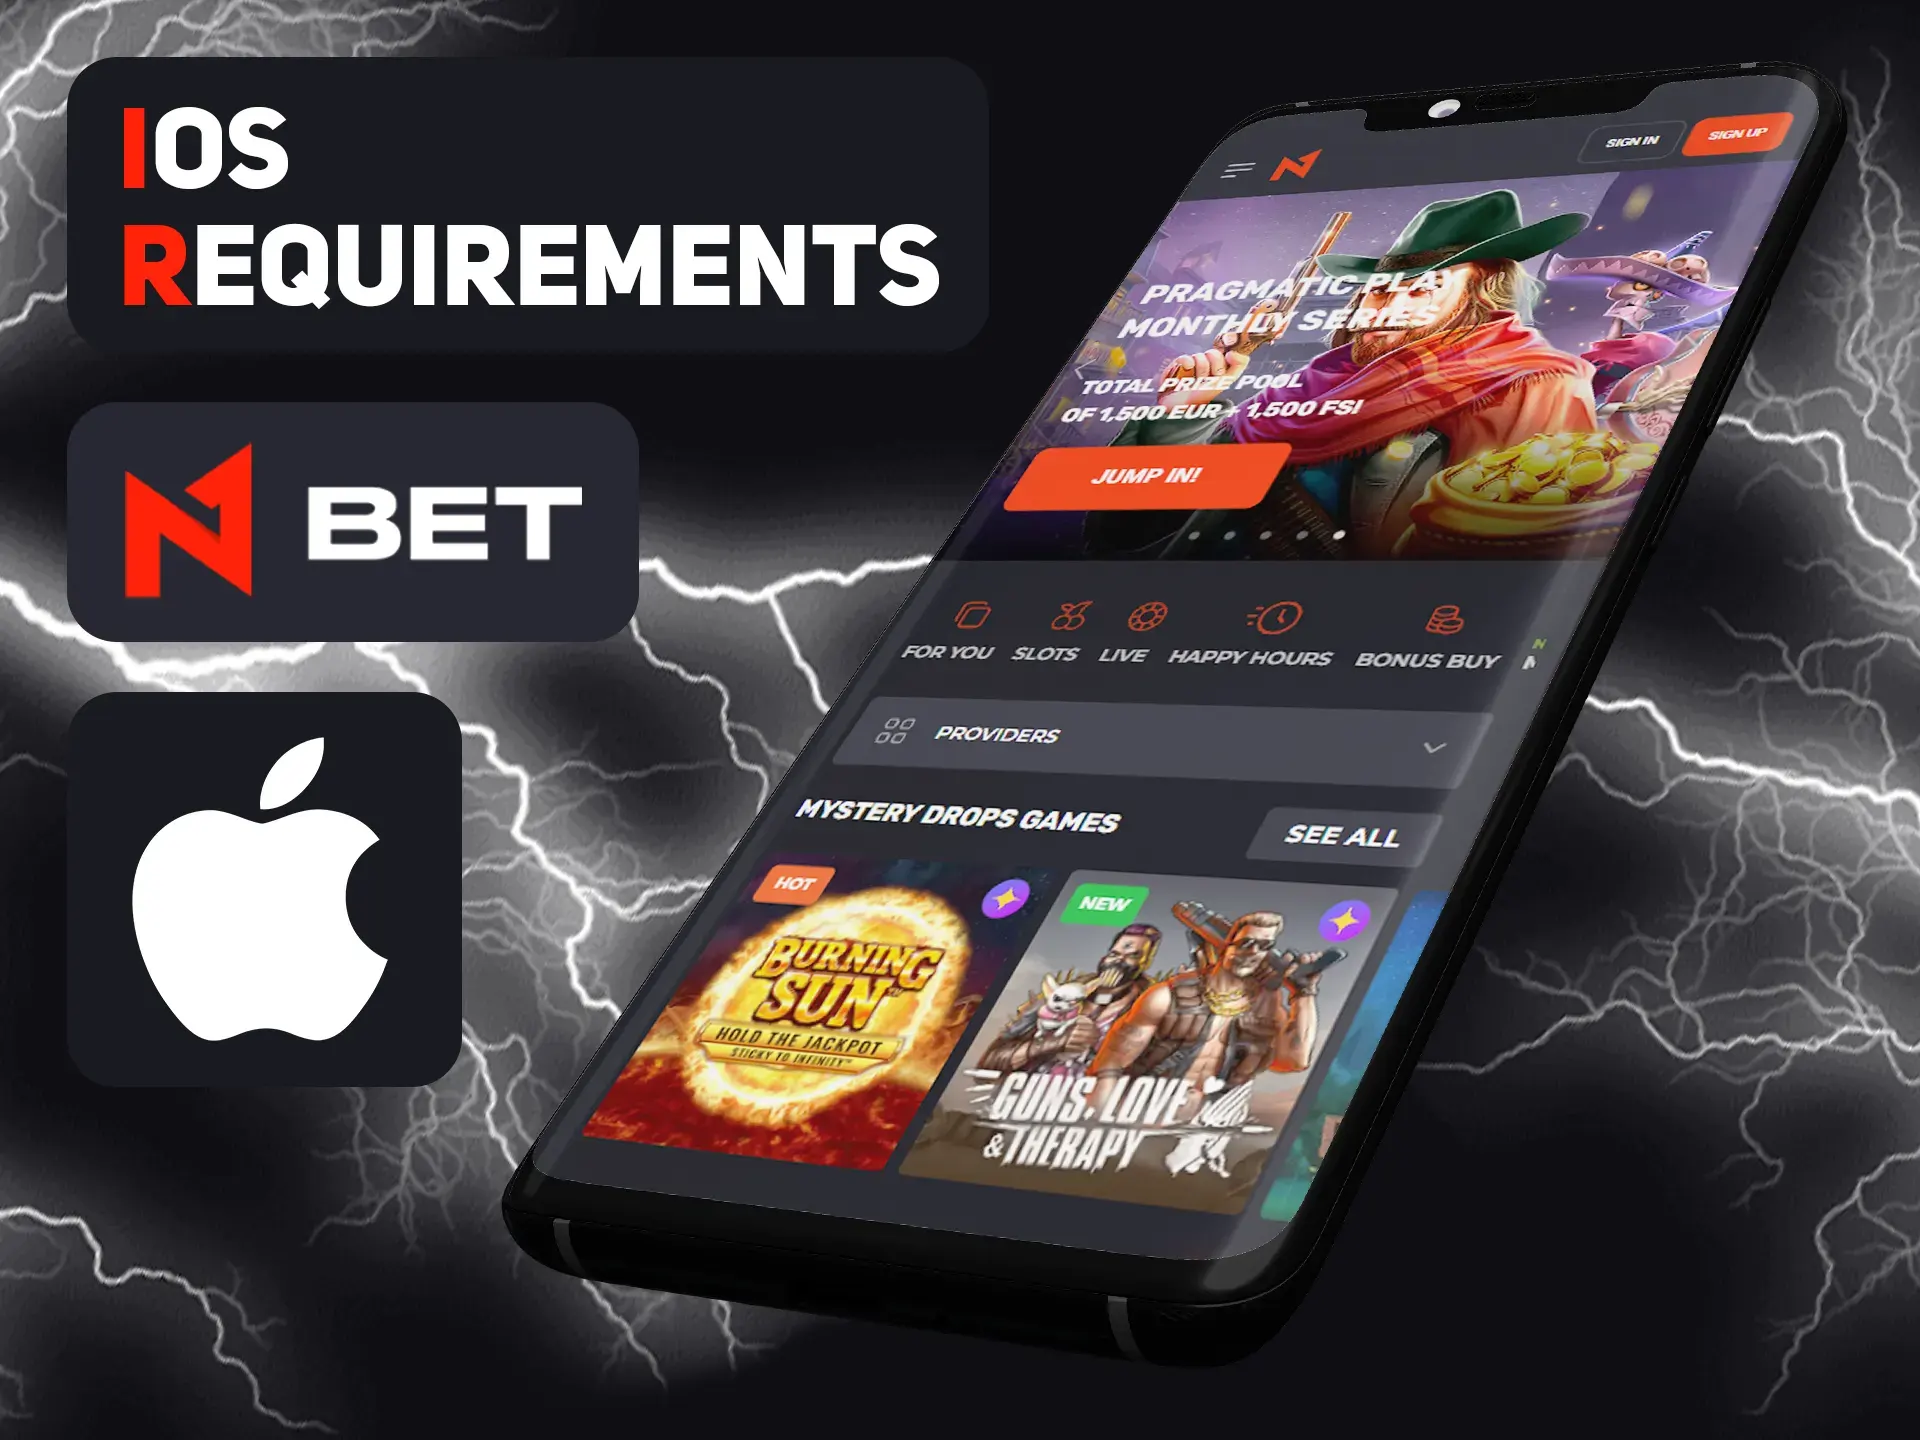 N1bet iOS app supports many of iOS devices.